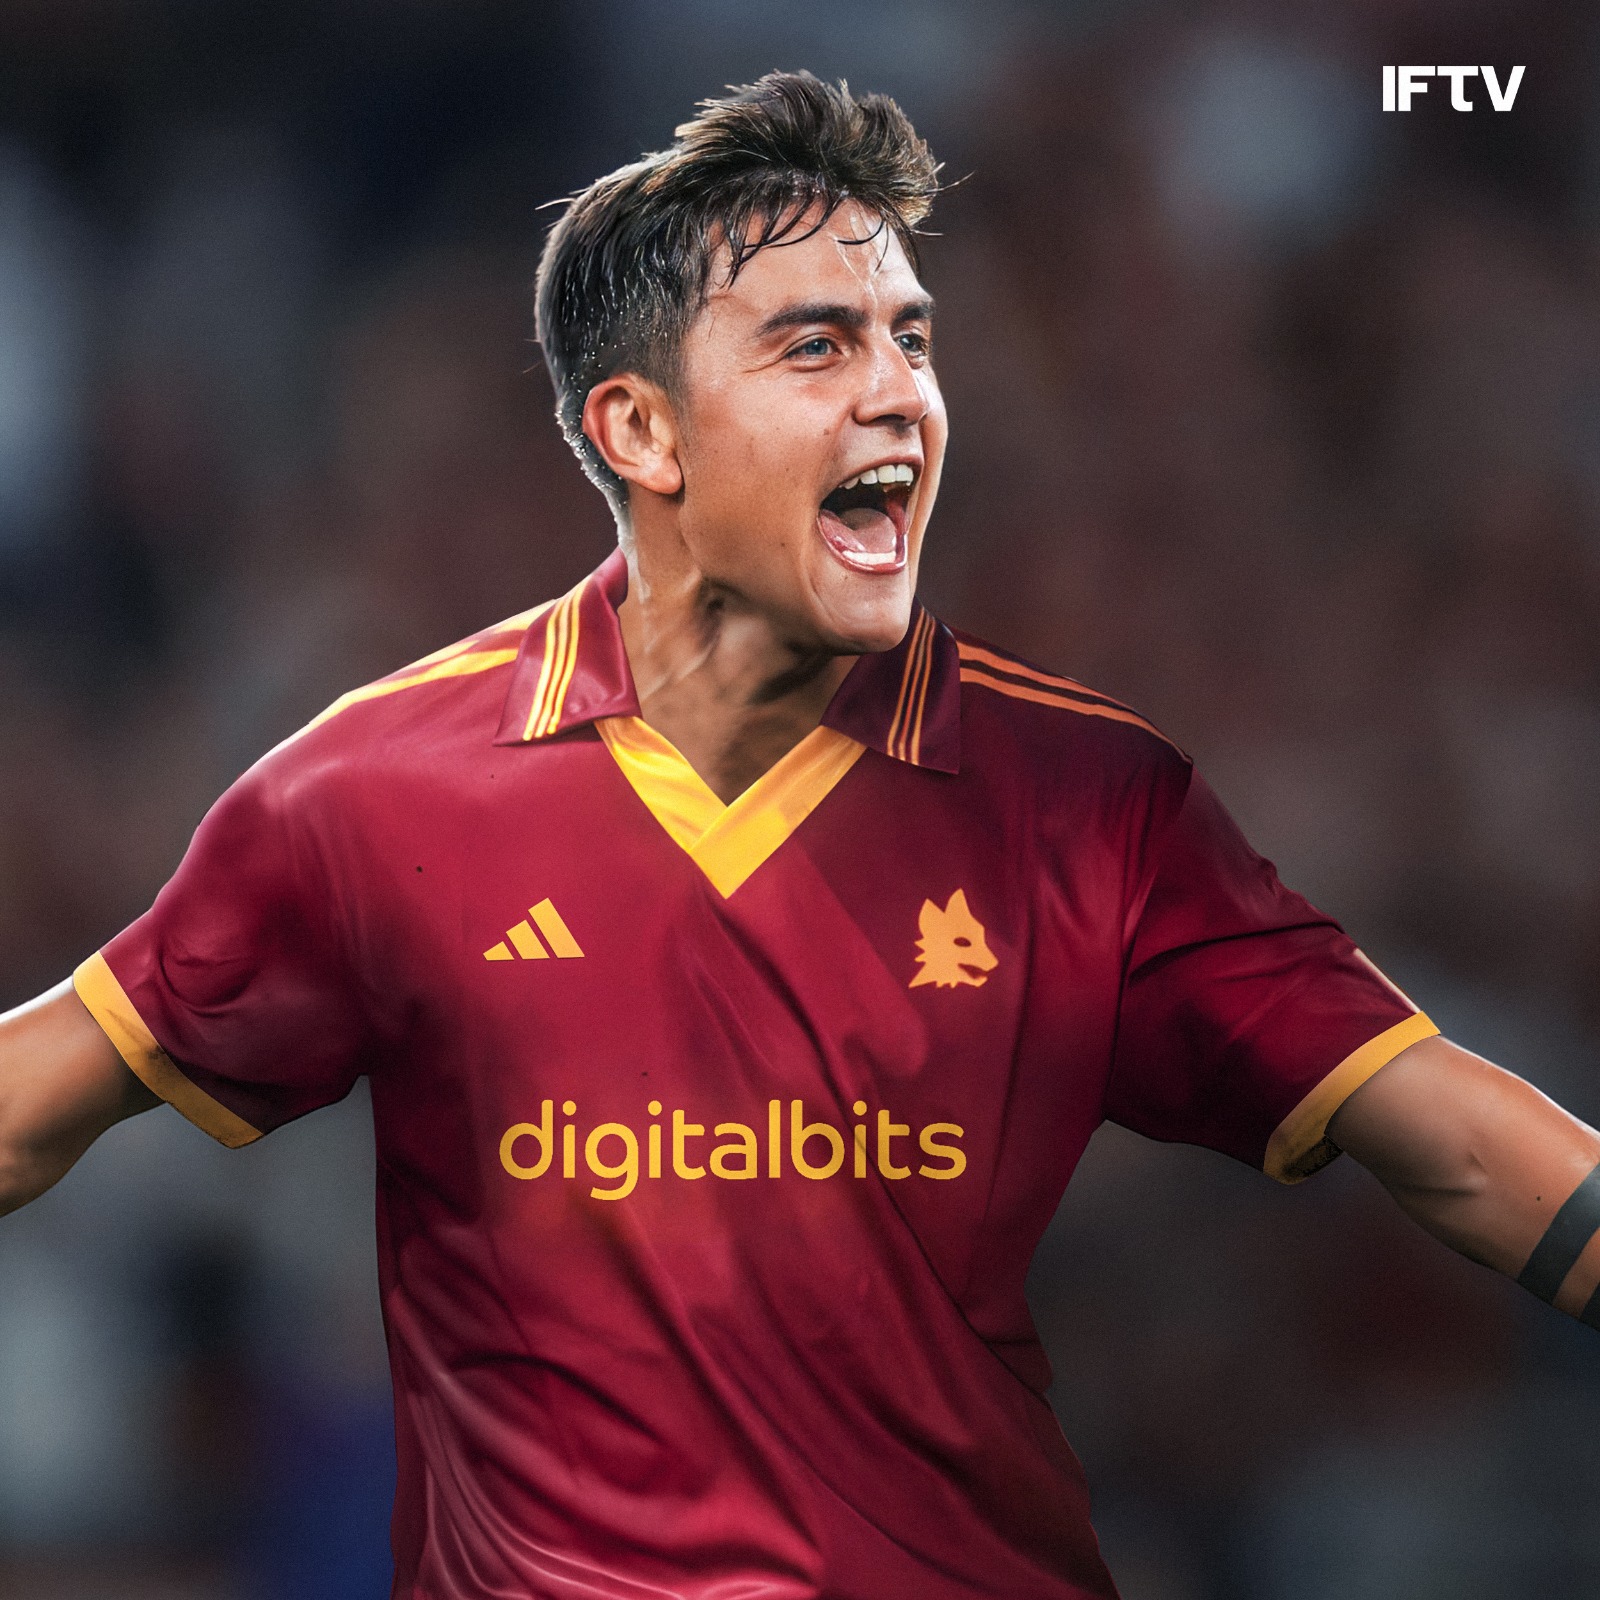 adidas and AS Roma Release Their First Kit in 30 Years Ahead of